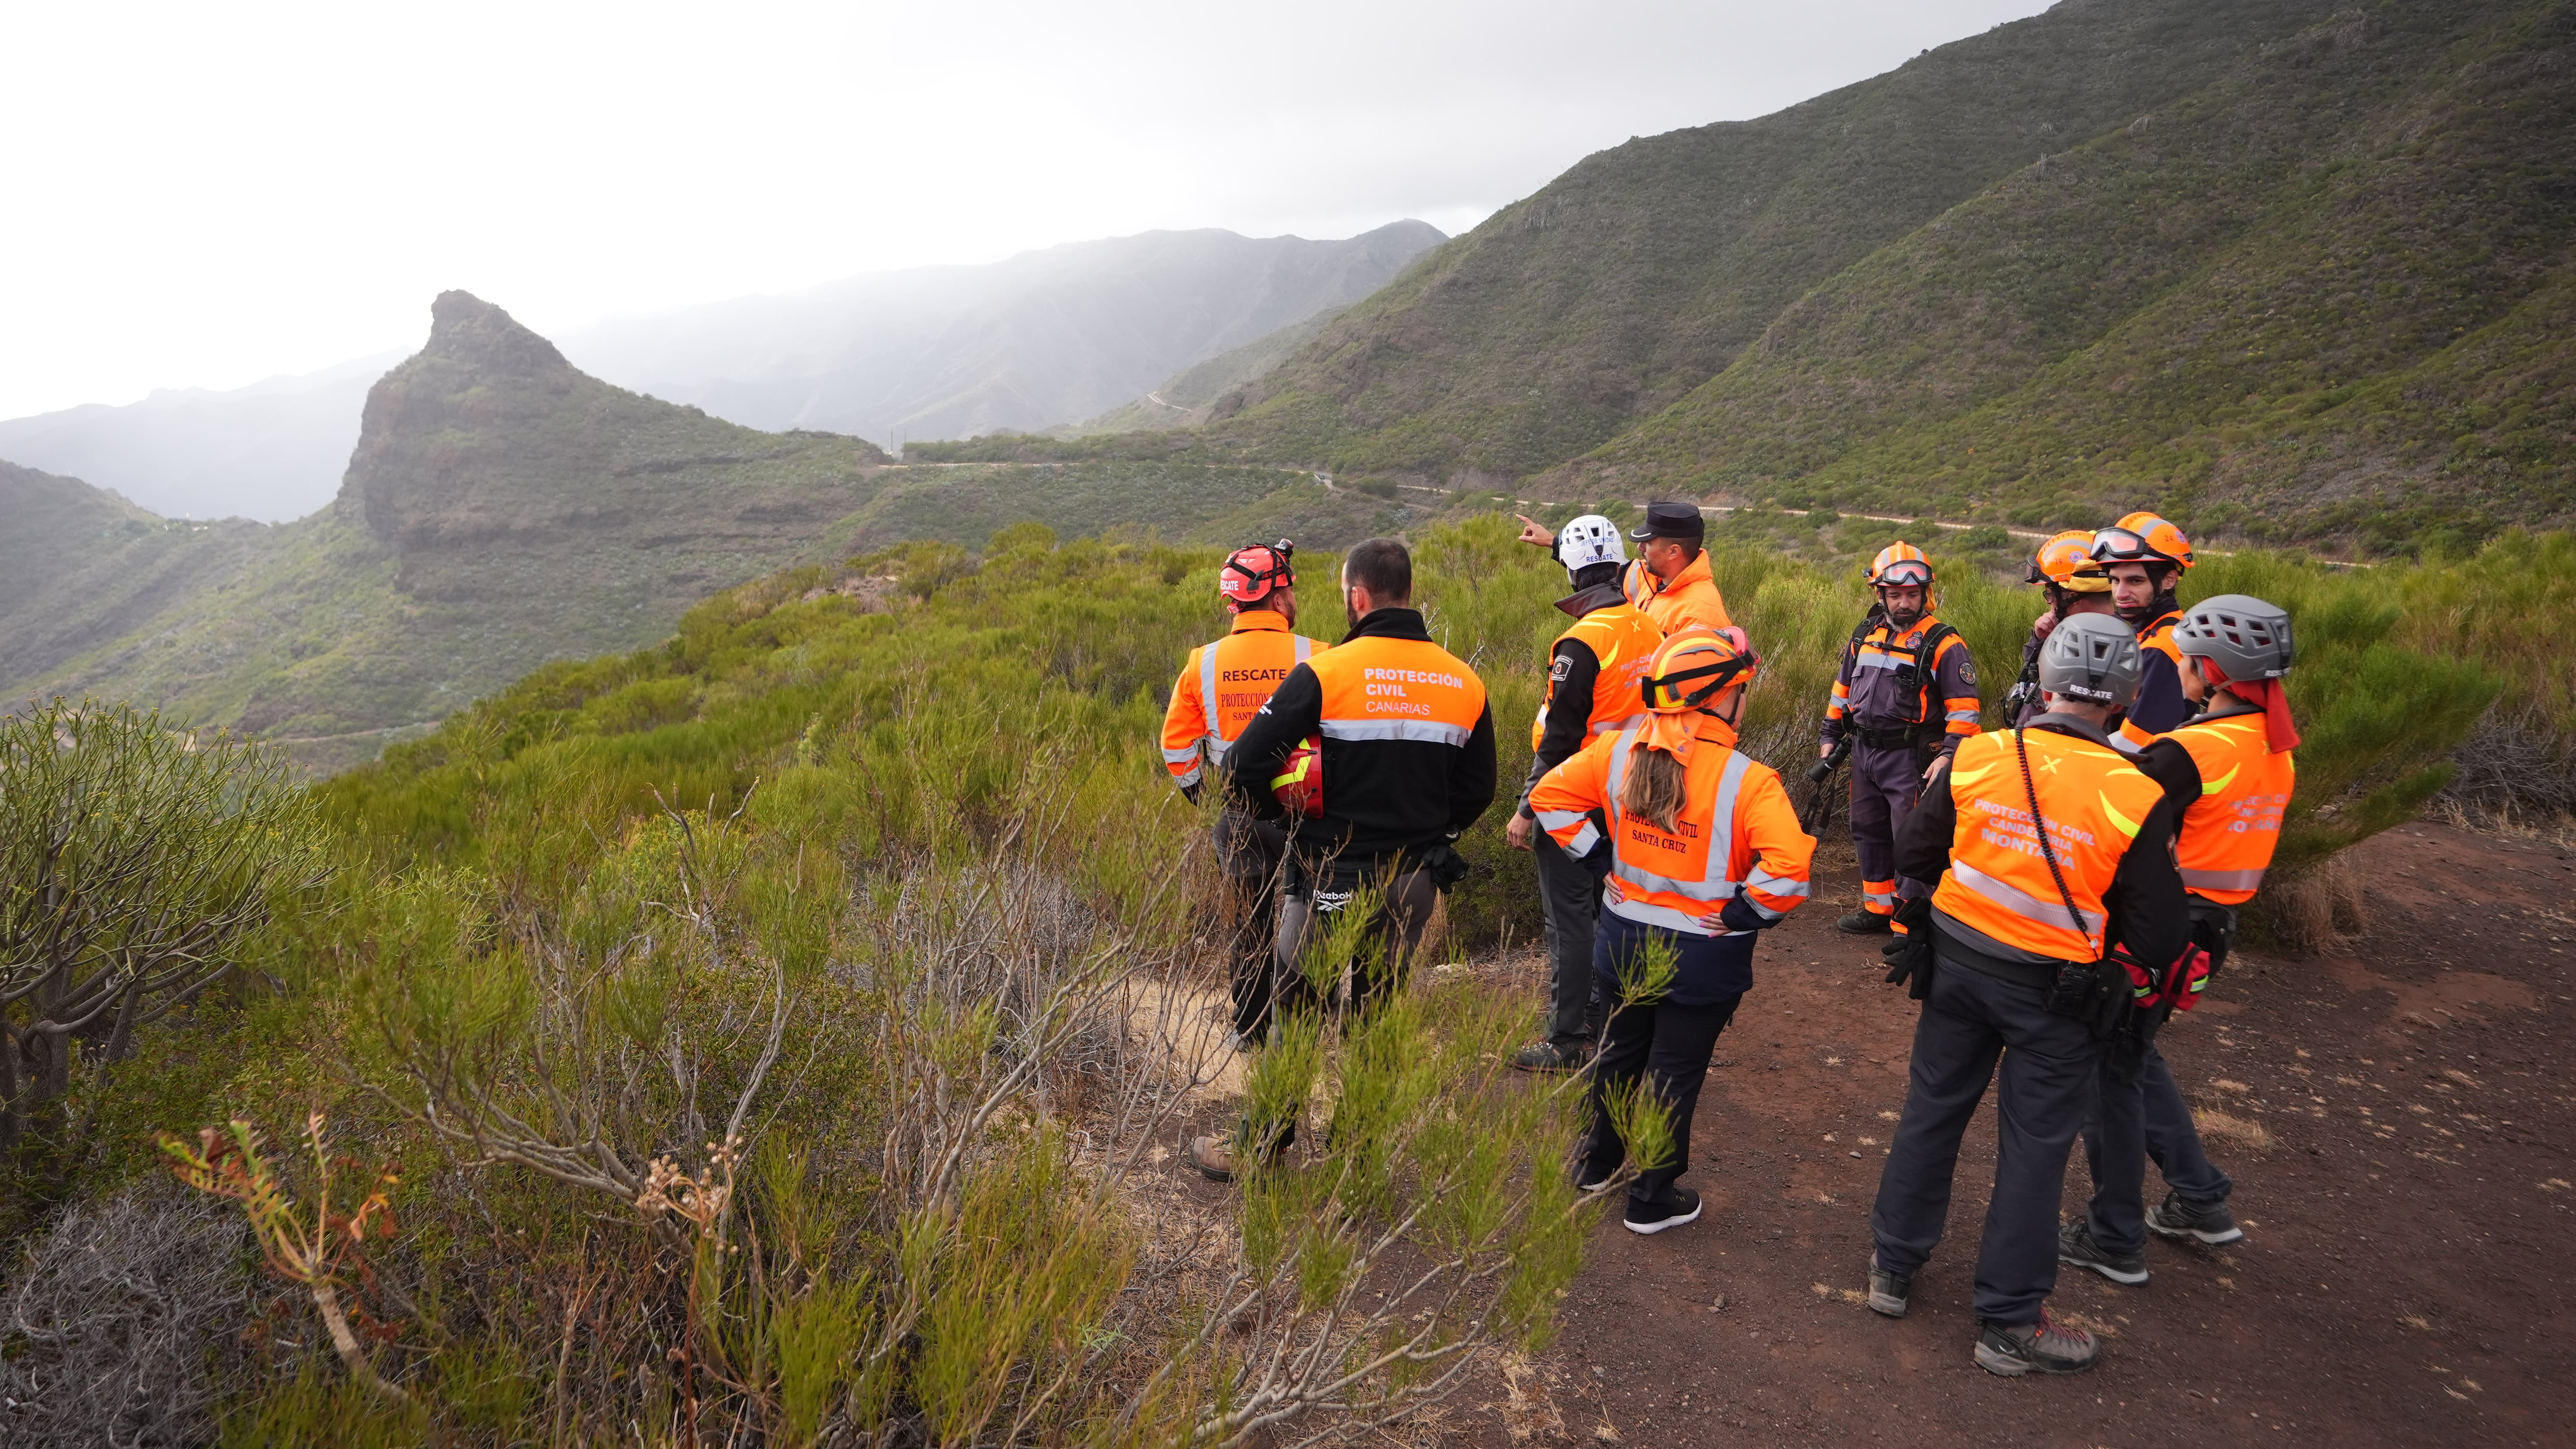 A group of search and rescue workers near to the village of Masca, Tenerife, where the search for missing British teenager Jay Slater, 19, from Oswaldtwistle, Lancashire, continues